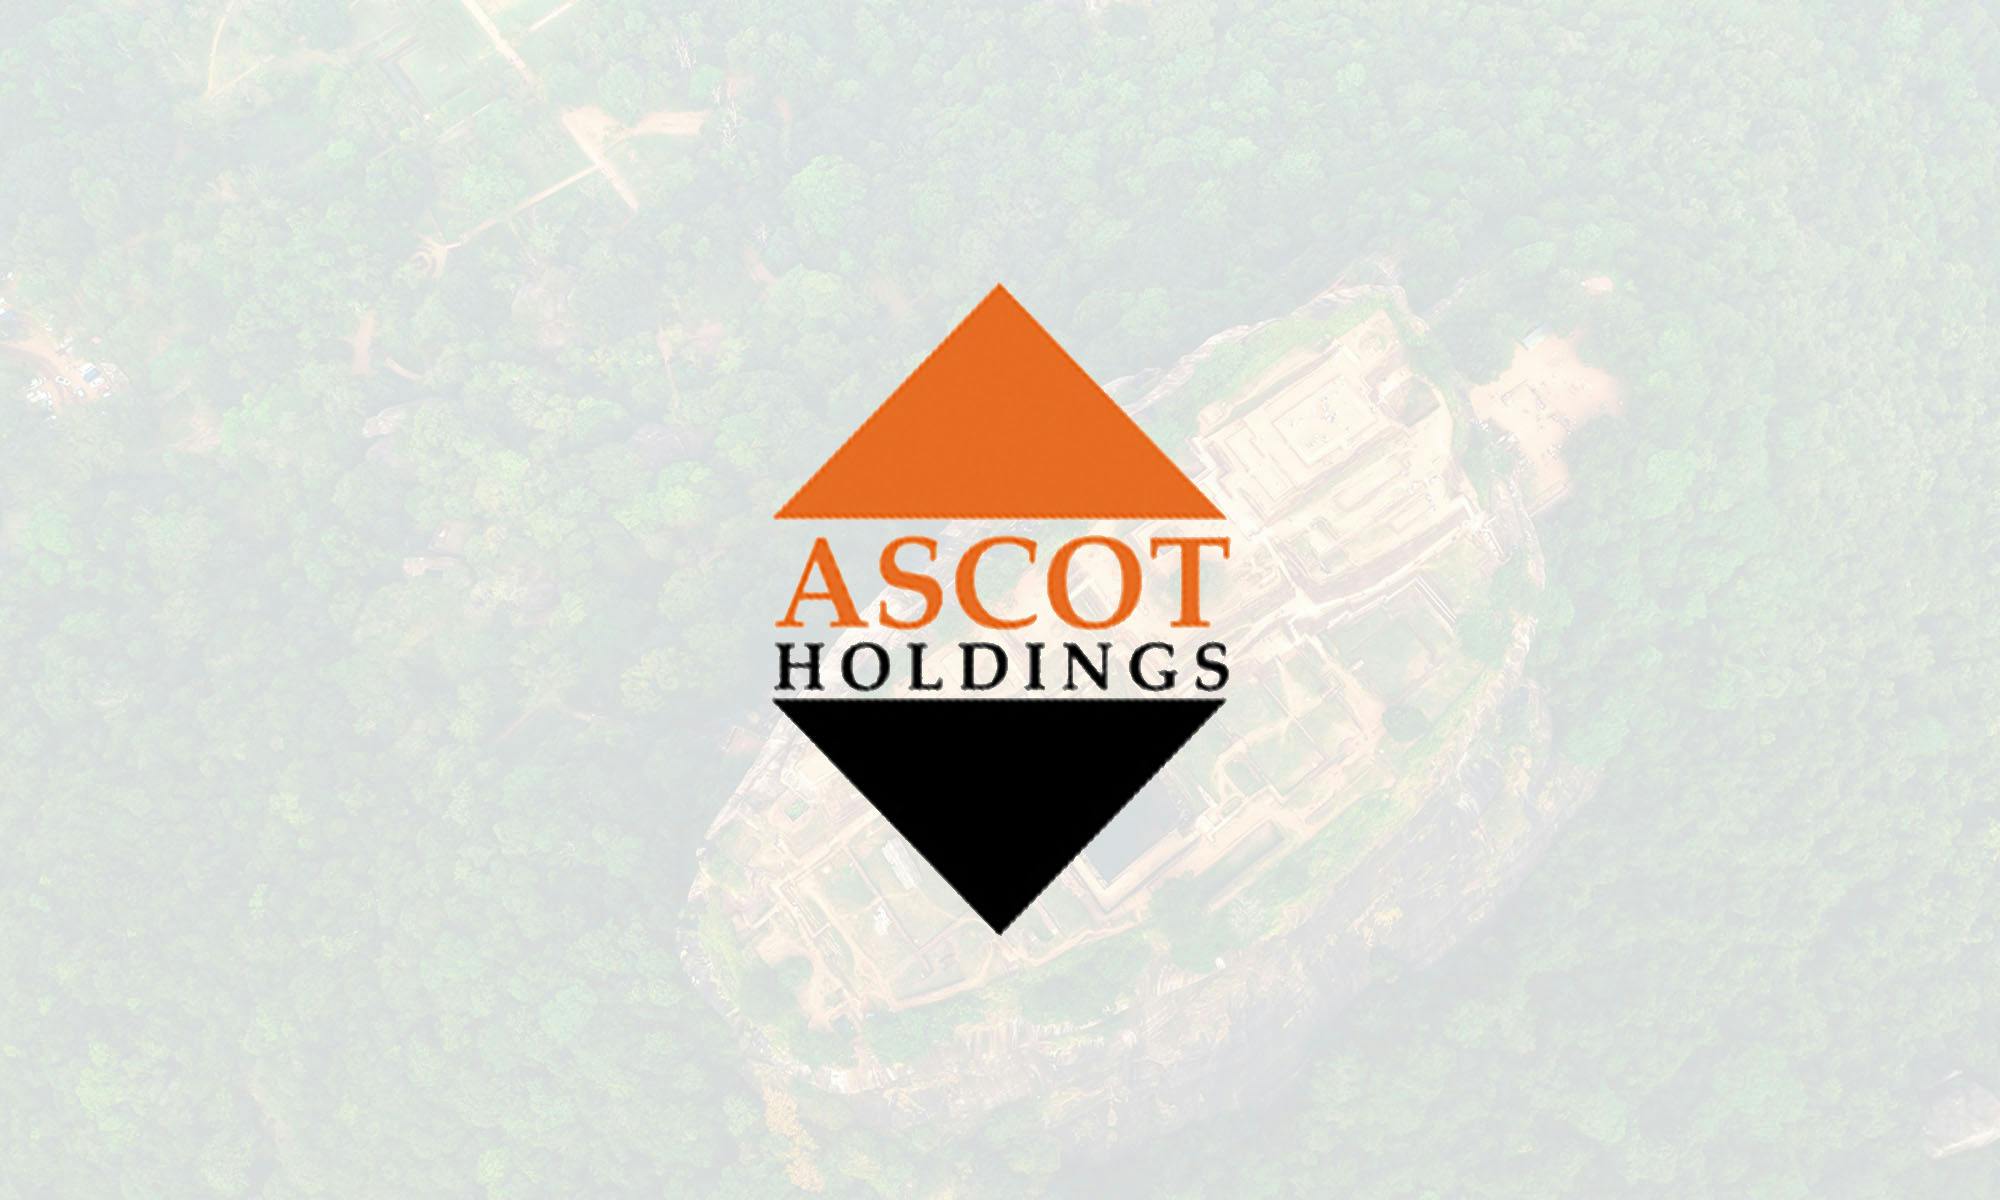 Local-foreign consortium buys 45% stake in Ascot for Rs.241mn